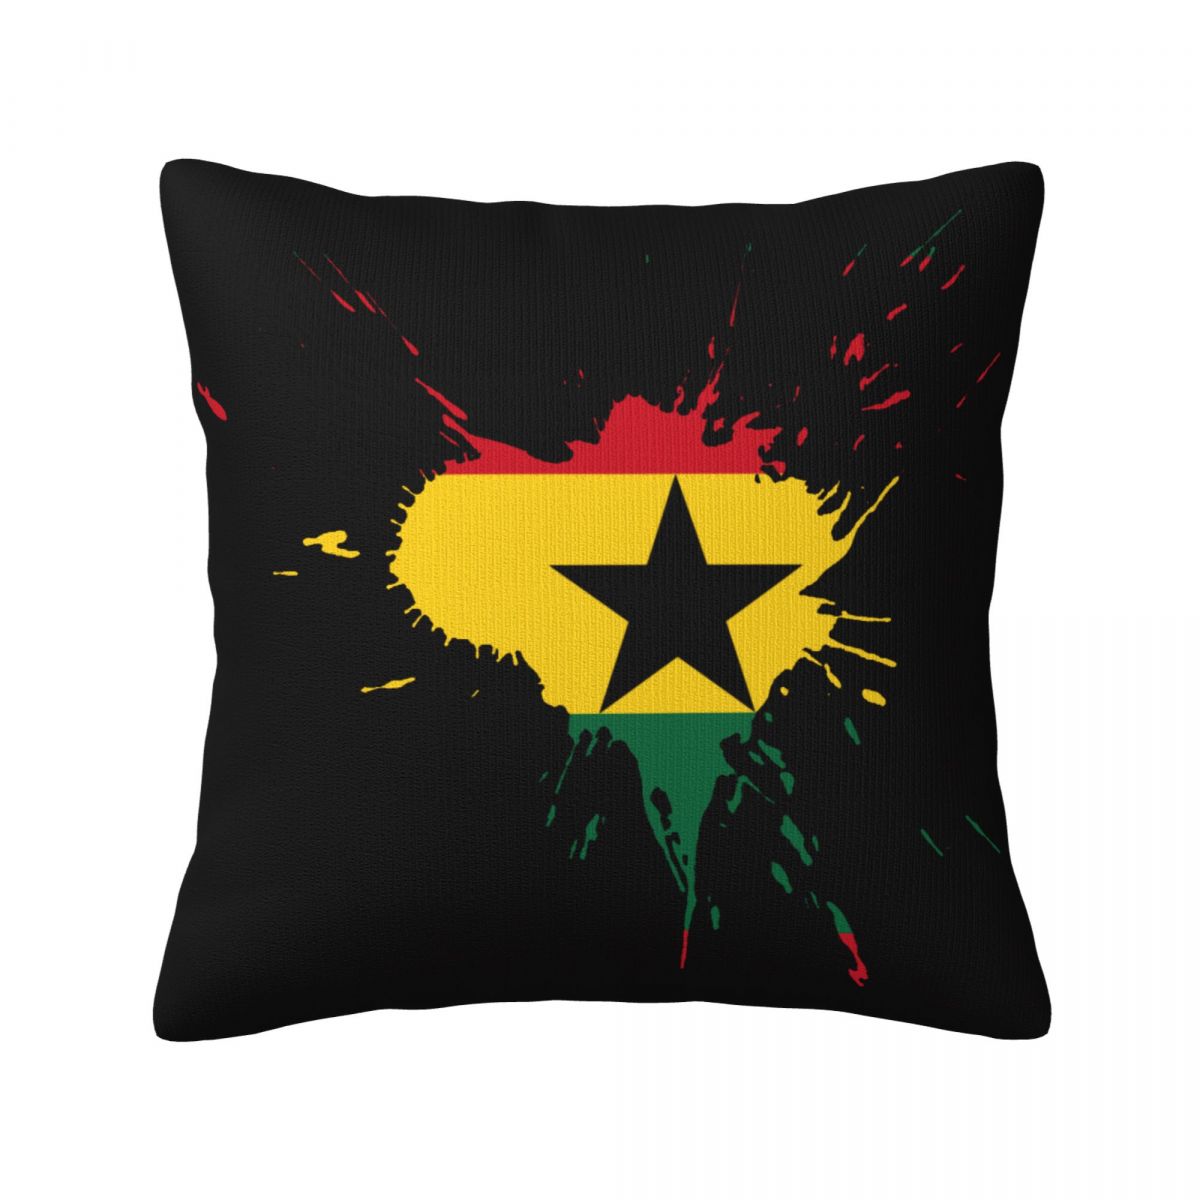 Ghana Ink Spatter Decorative Square Throw Pillow Covers